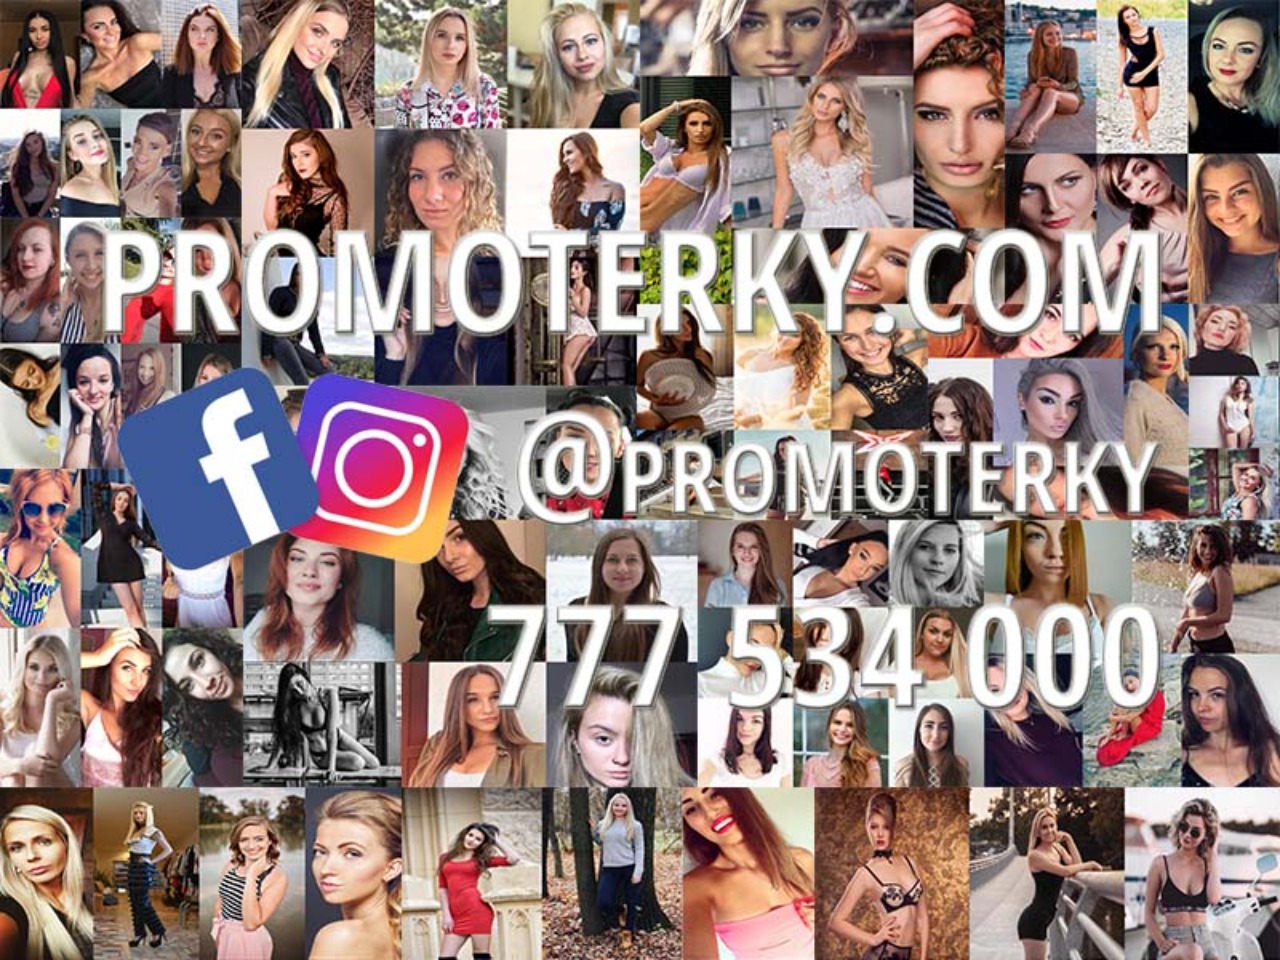 We are looking for Hostesses/Promoters/Models for various private events and events to join our team.